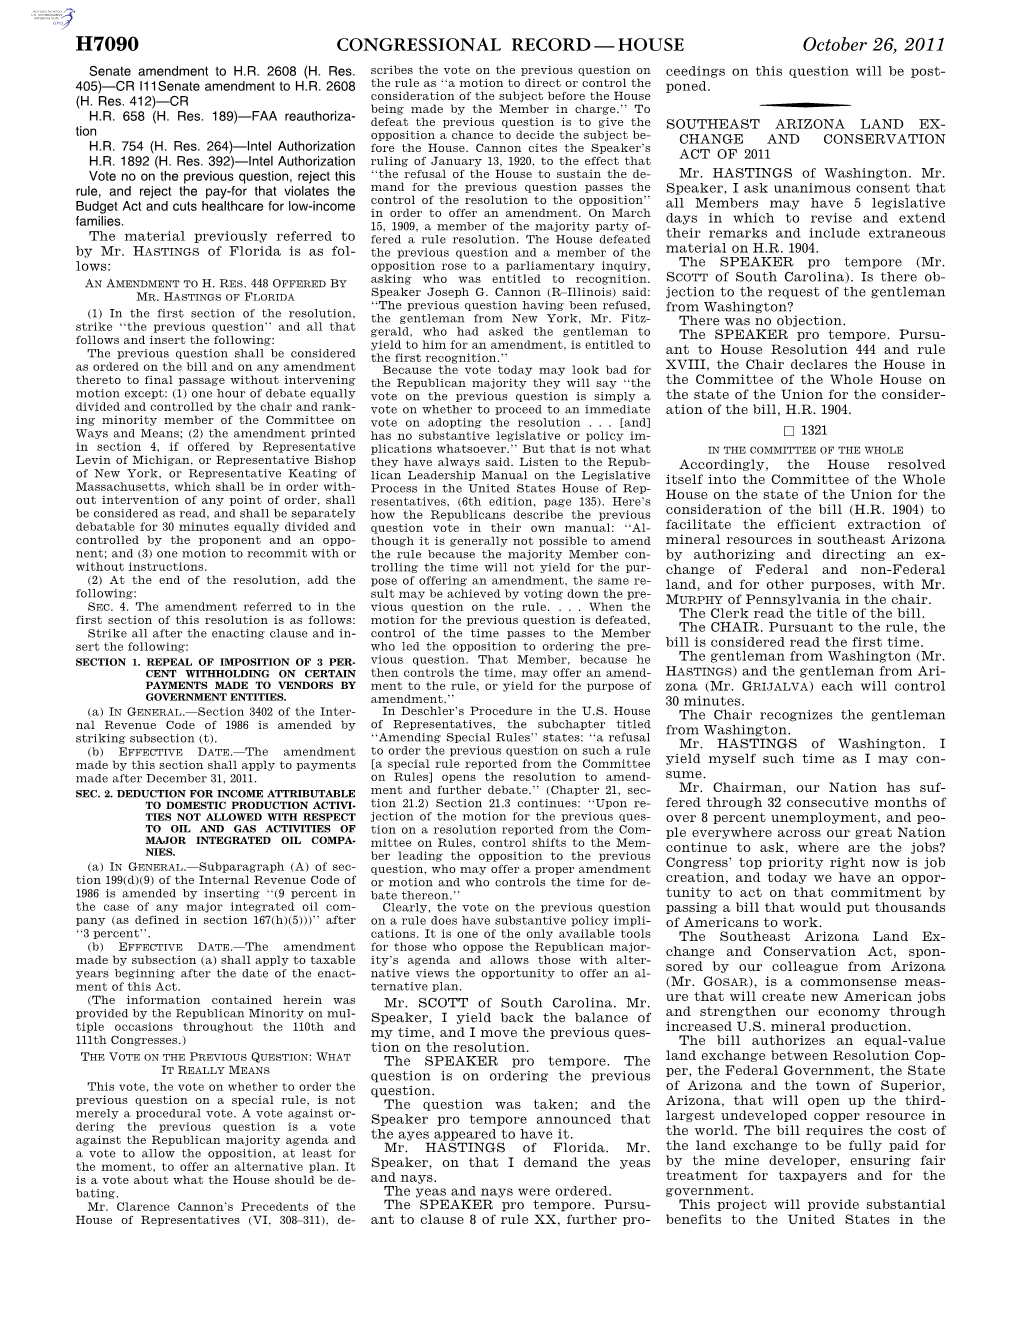 Congressional Record—House H7090